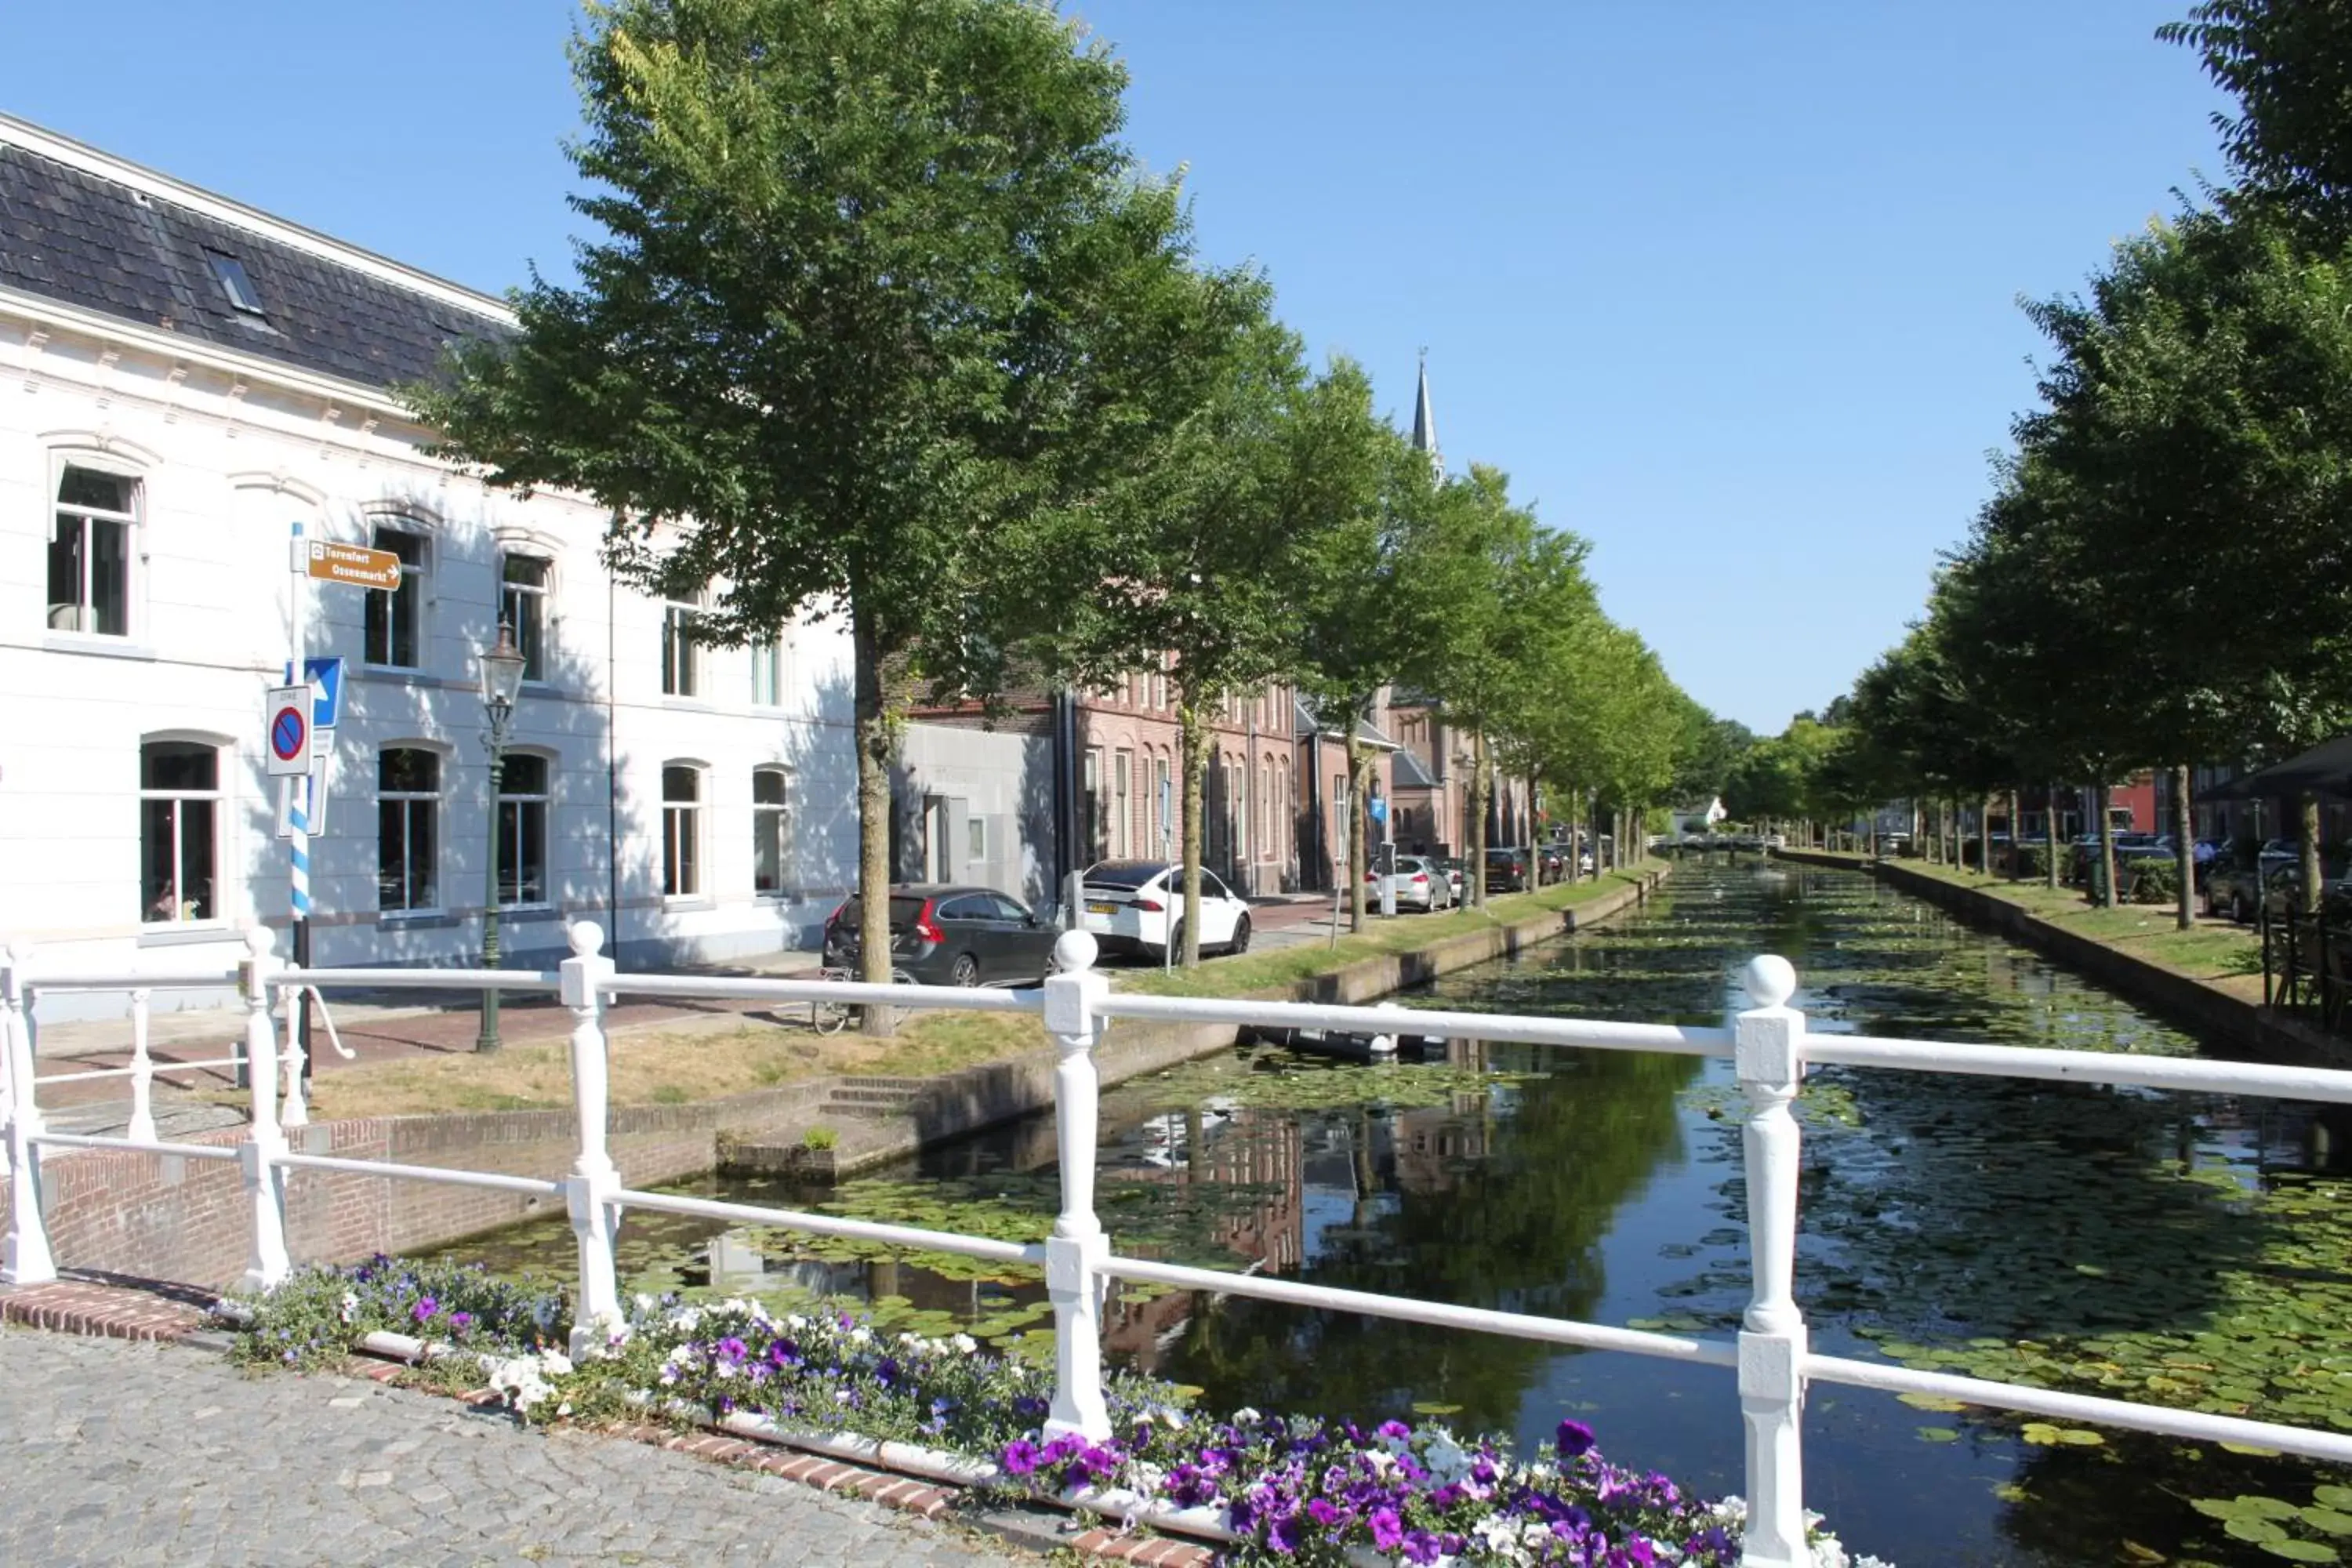 Property building in Boutique Hotel Weesp